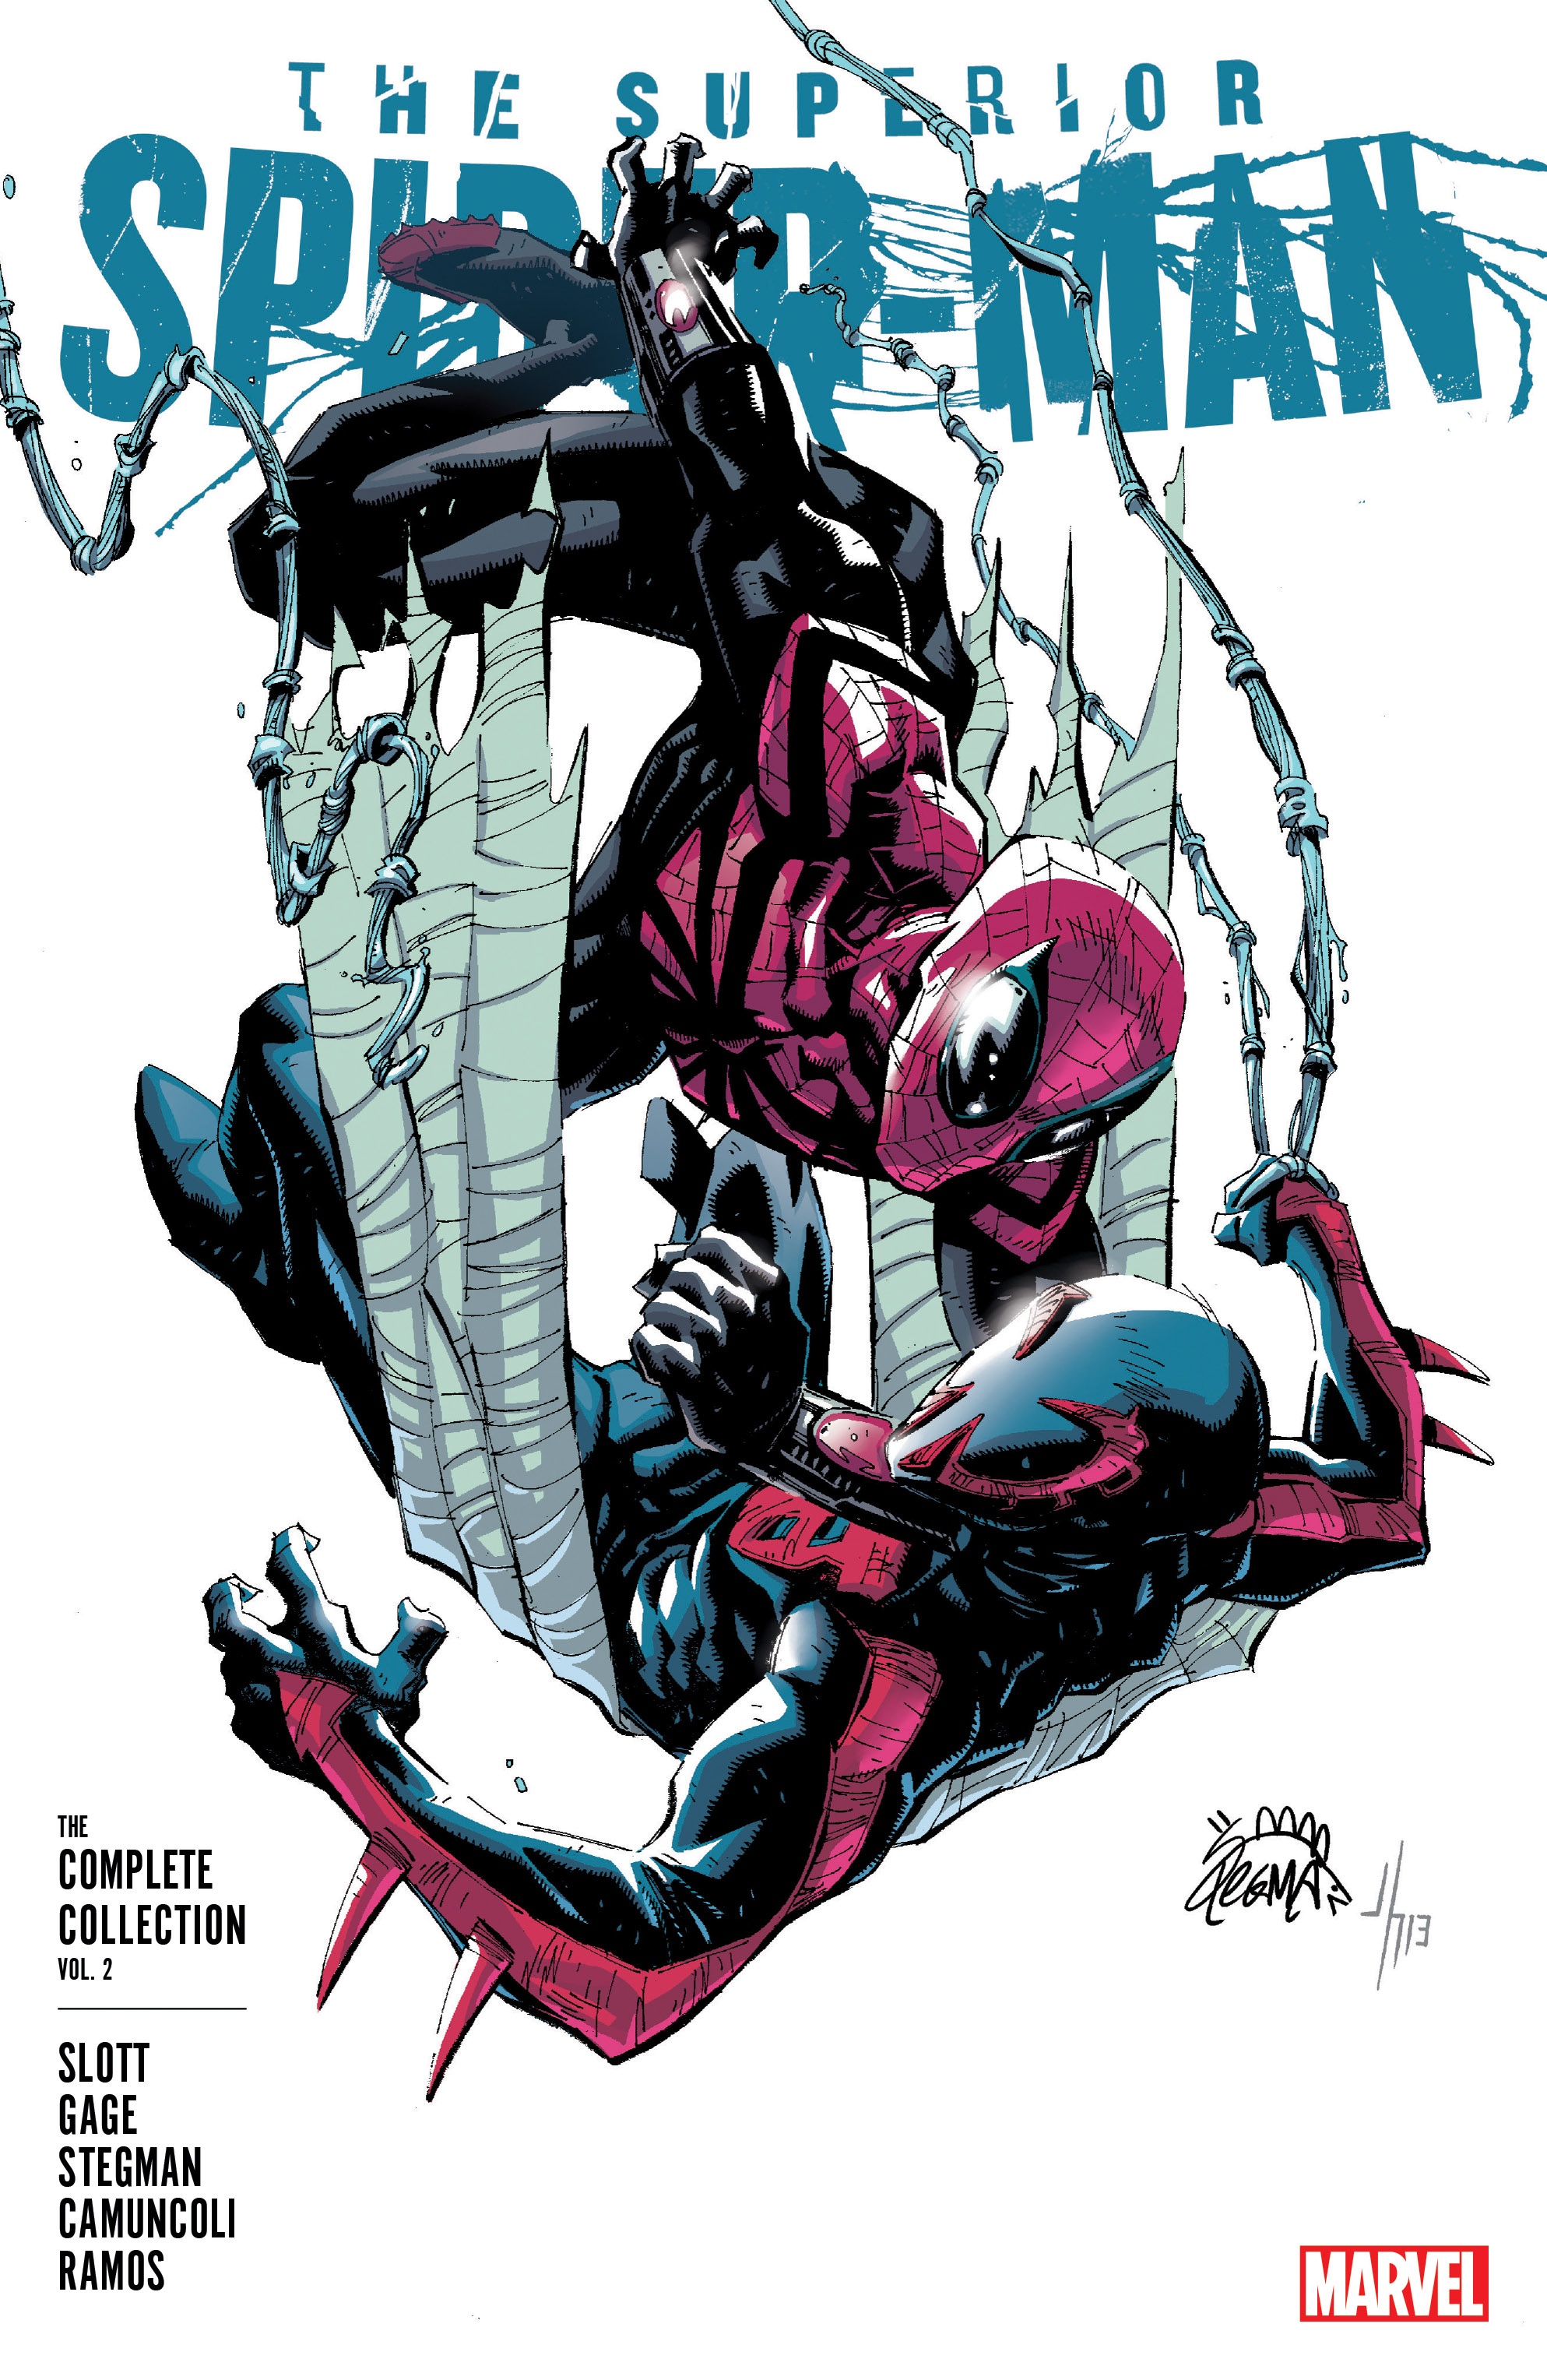 Superior Spider-Man: The Complete Collection Vol. 2 (Trade Paperback)